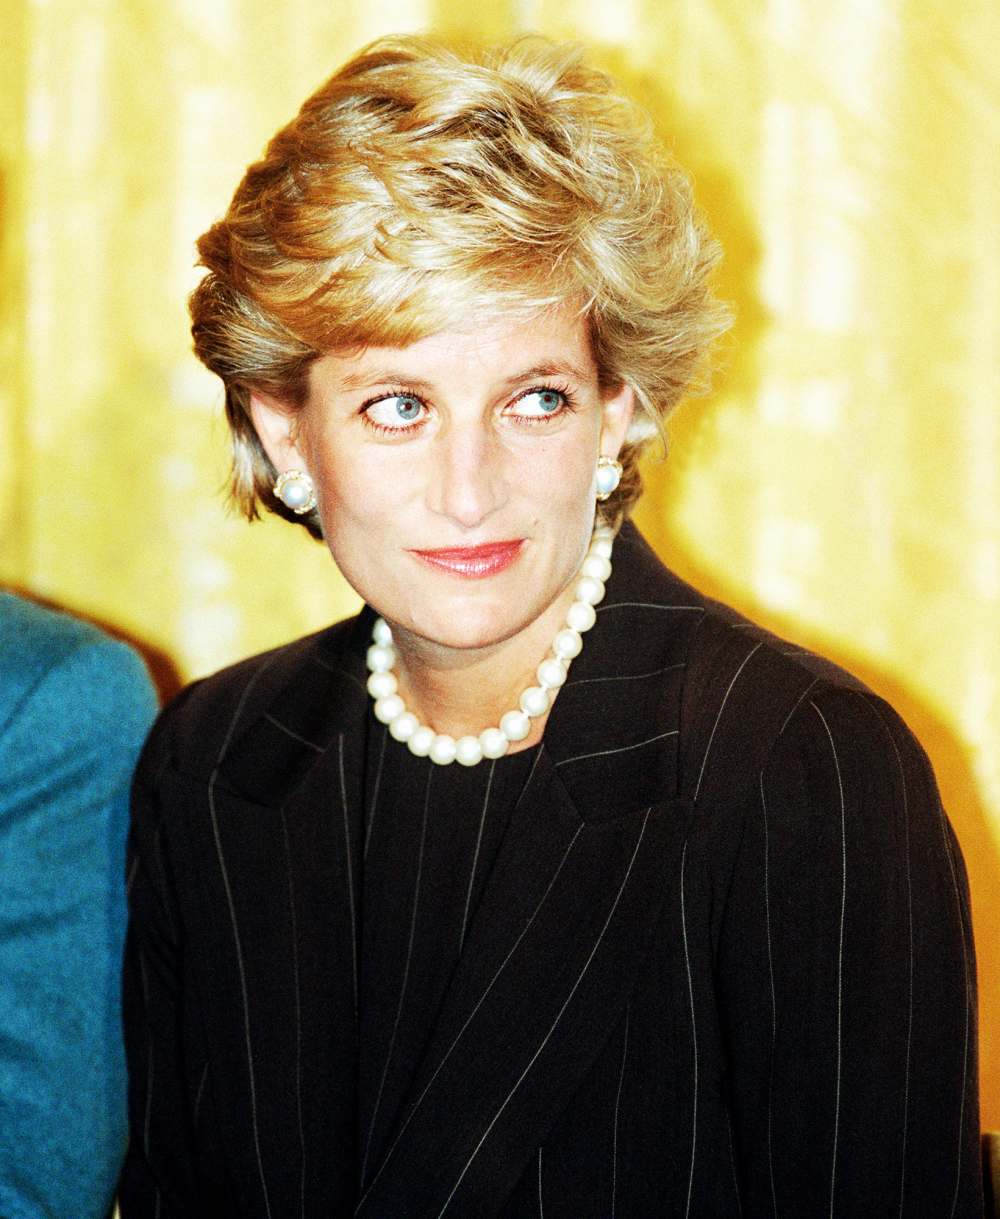 Princess-Diana-Podcast-Demands-New-Inquest-Into-Her-Tragic-Death-After-Tracking-Down-Fiat-Driver